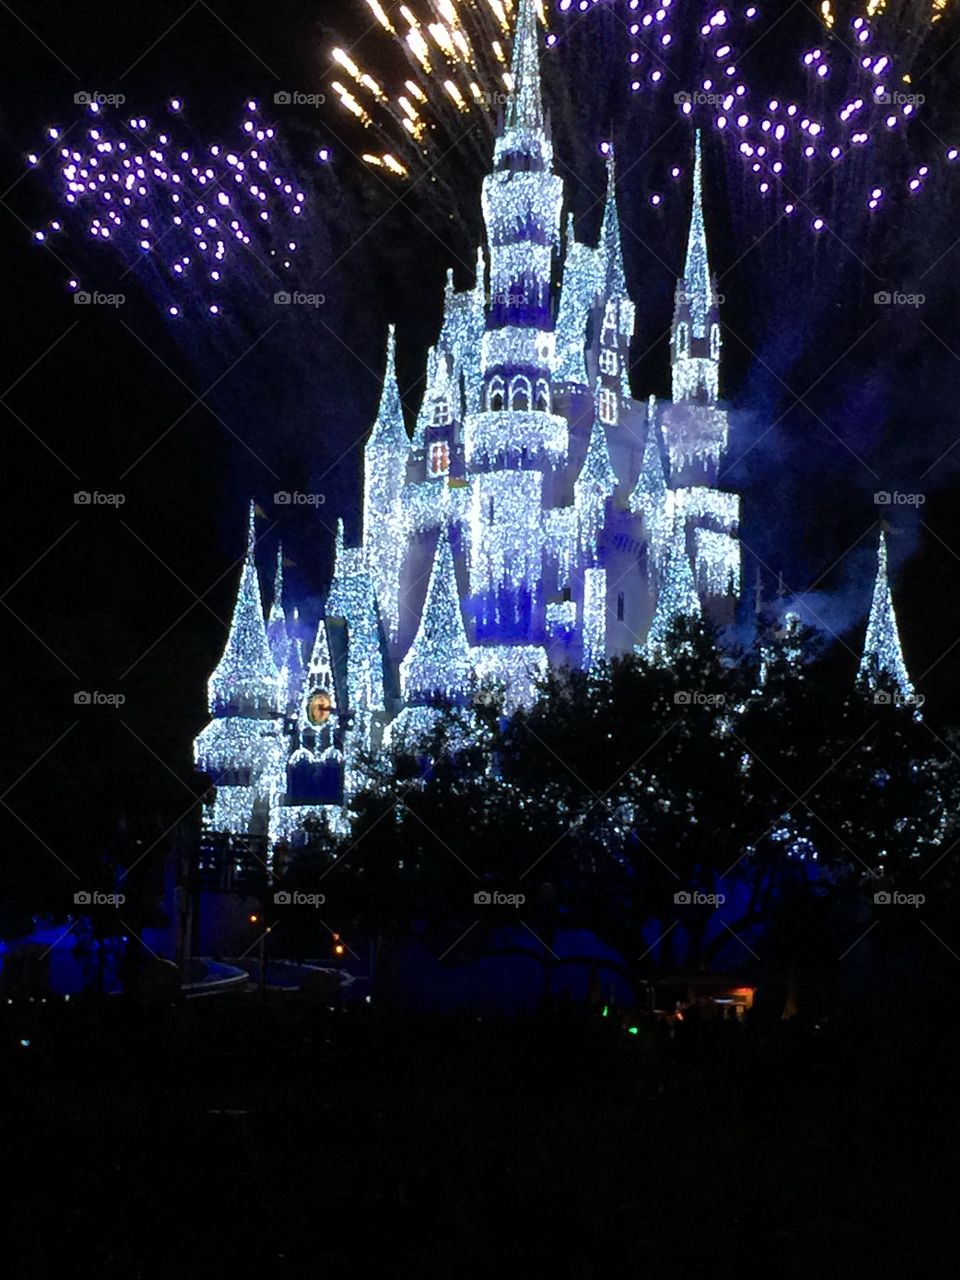 WDW at Christmas Fire Works